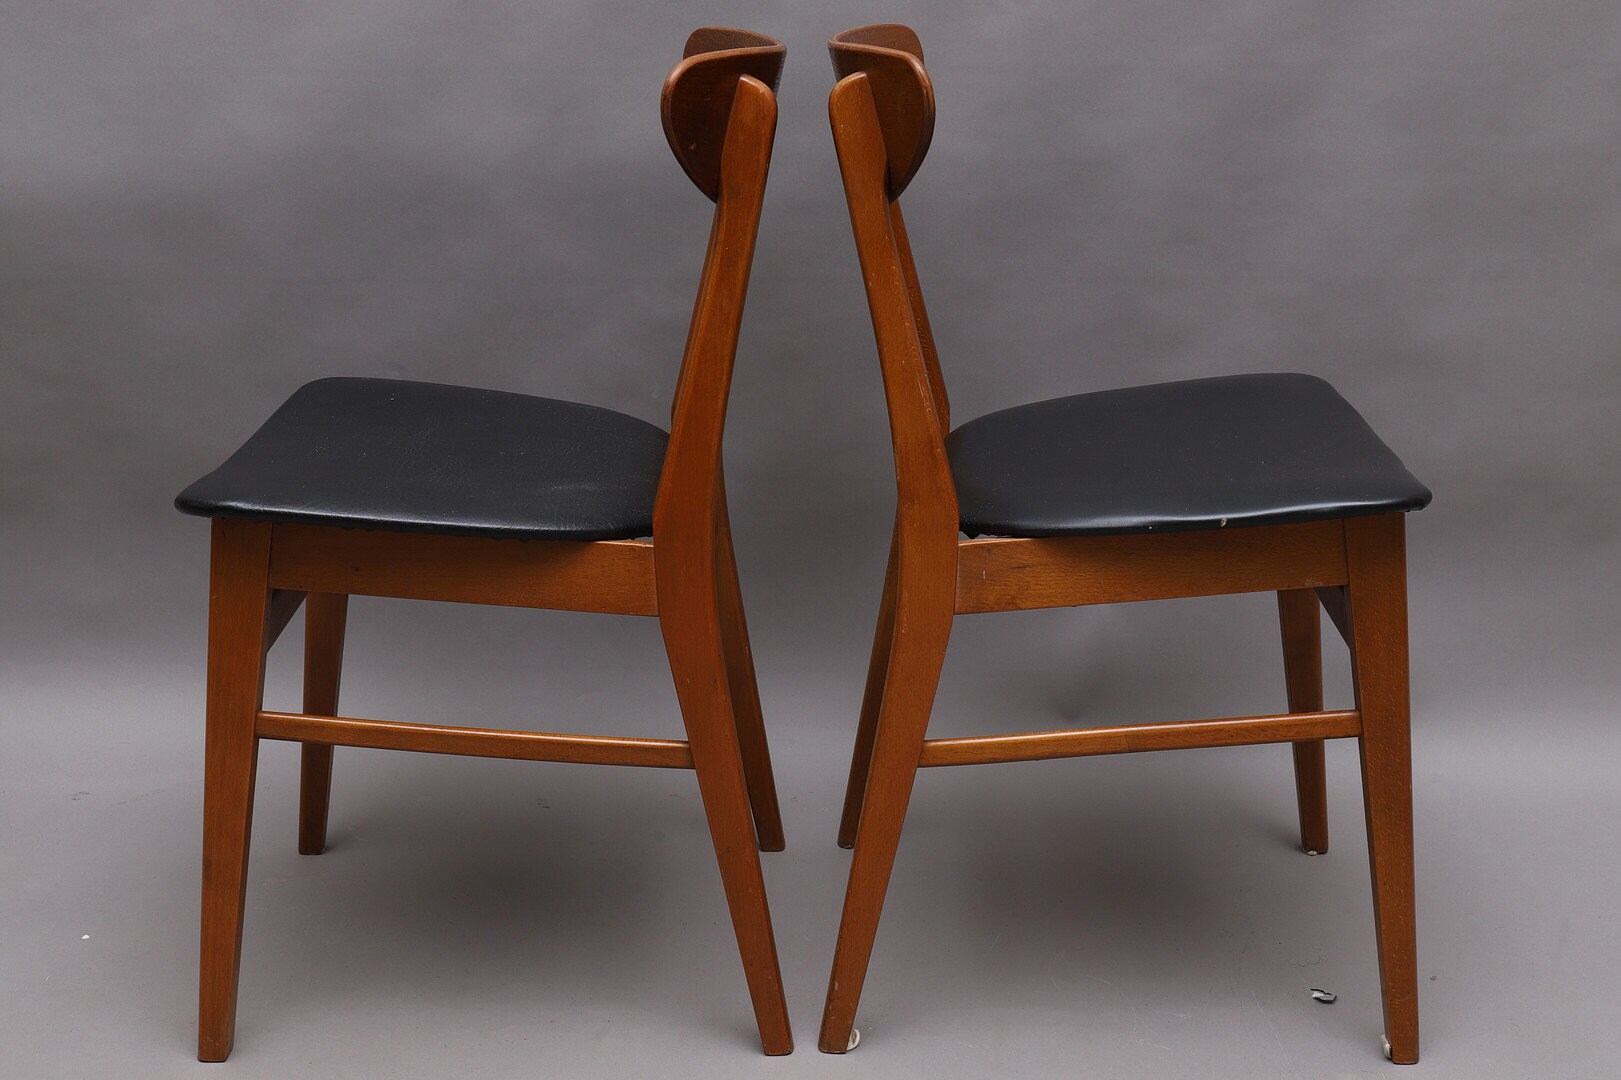 Cocktail Chairs, Steel, Leather, Fur, Teak. Vintage, Denmark, Anonymous. -   Norway